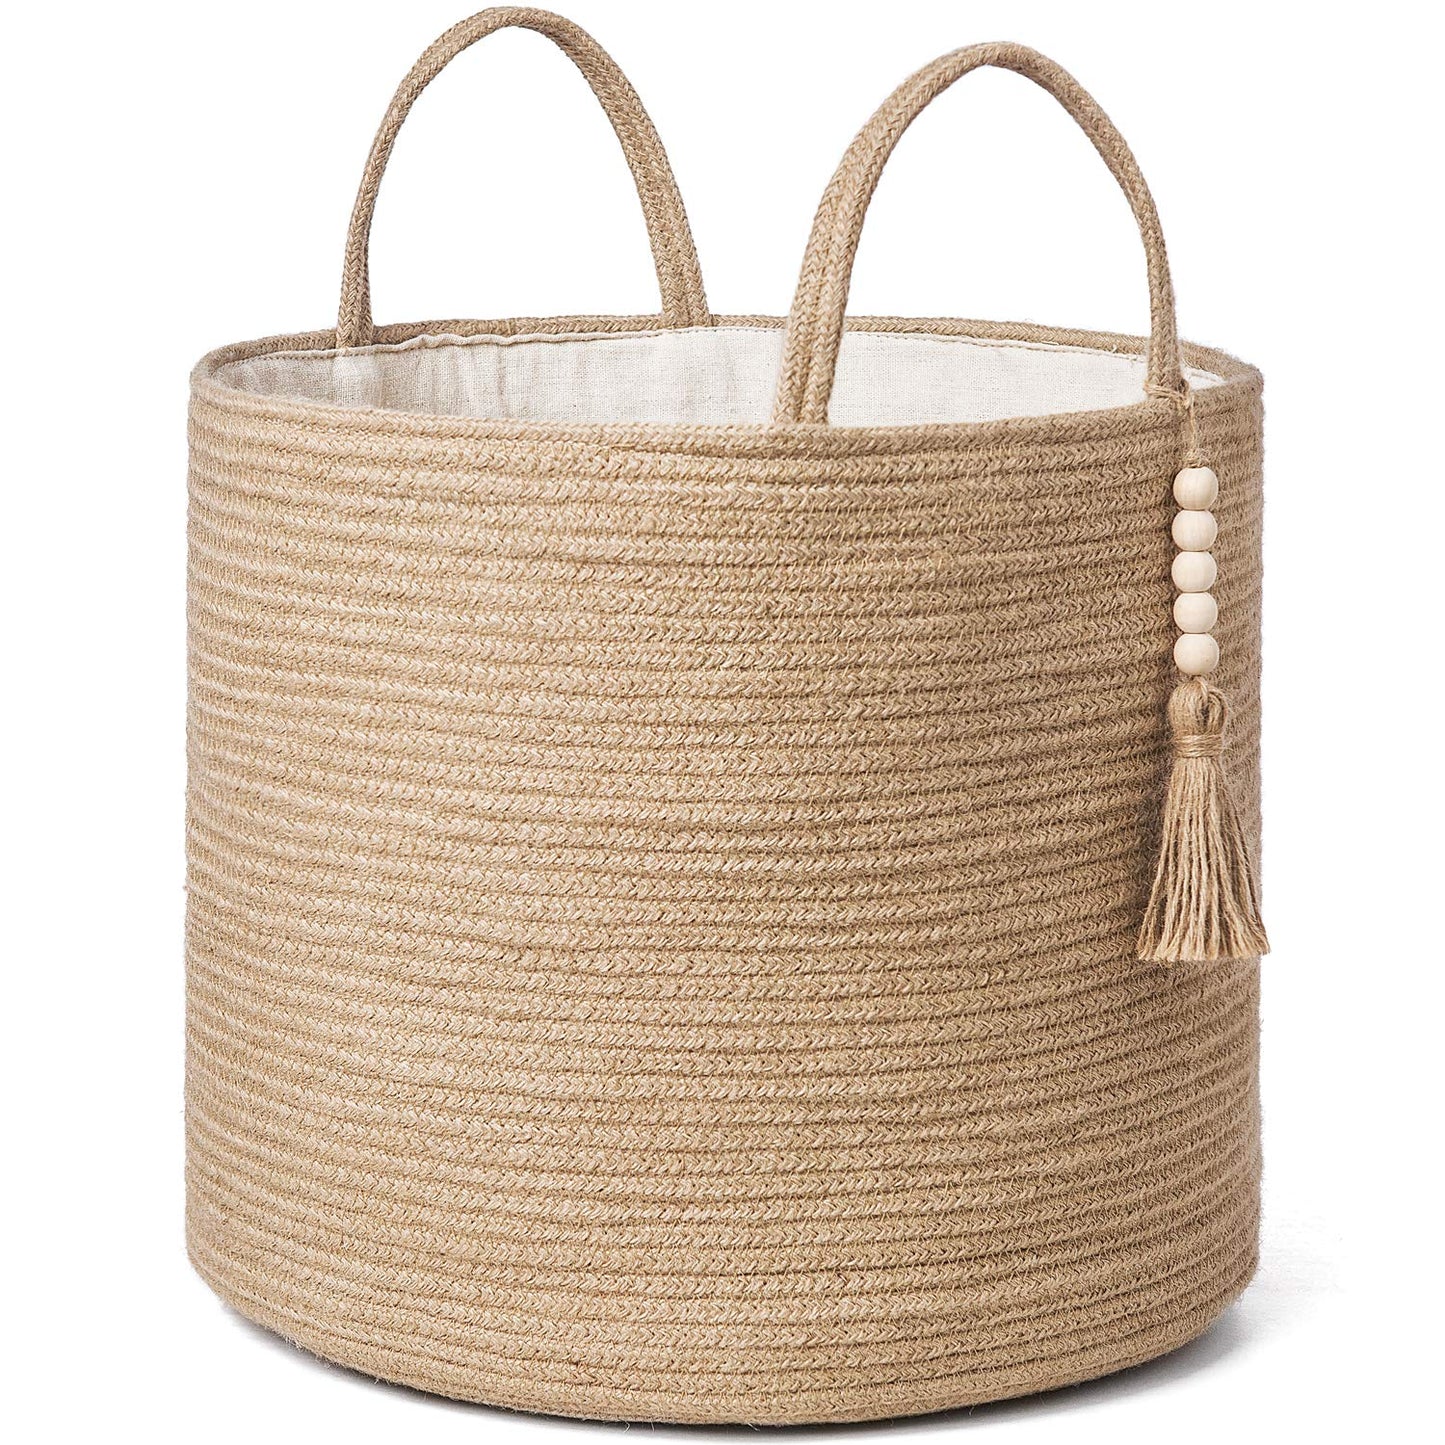 Woven Storage Basket Decorative Rope Basket Wooden Bead Decoration for Blankets,Toys,Clothes,Shoes